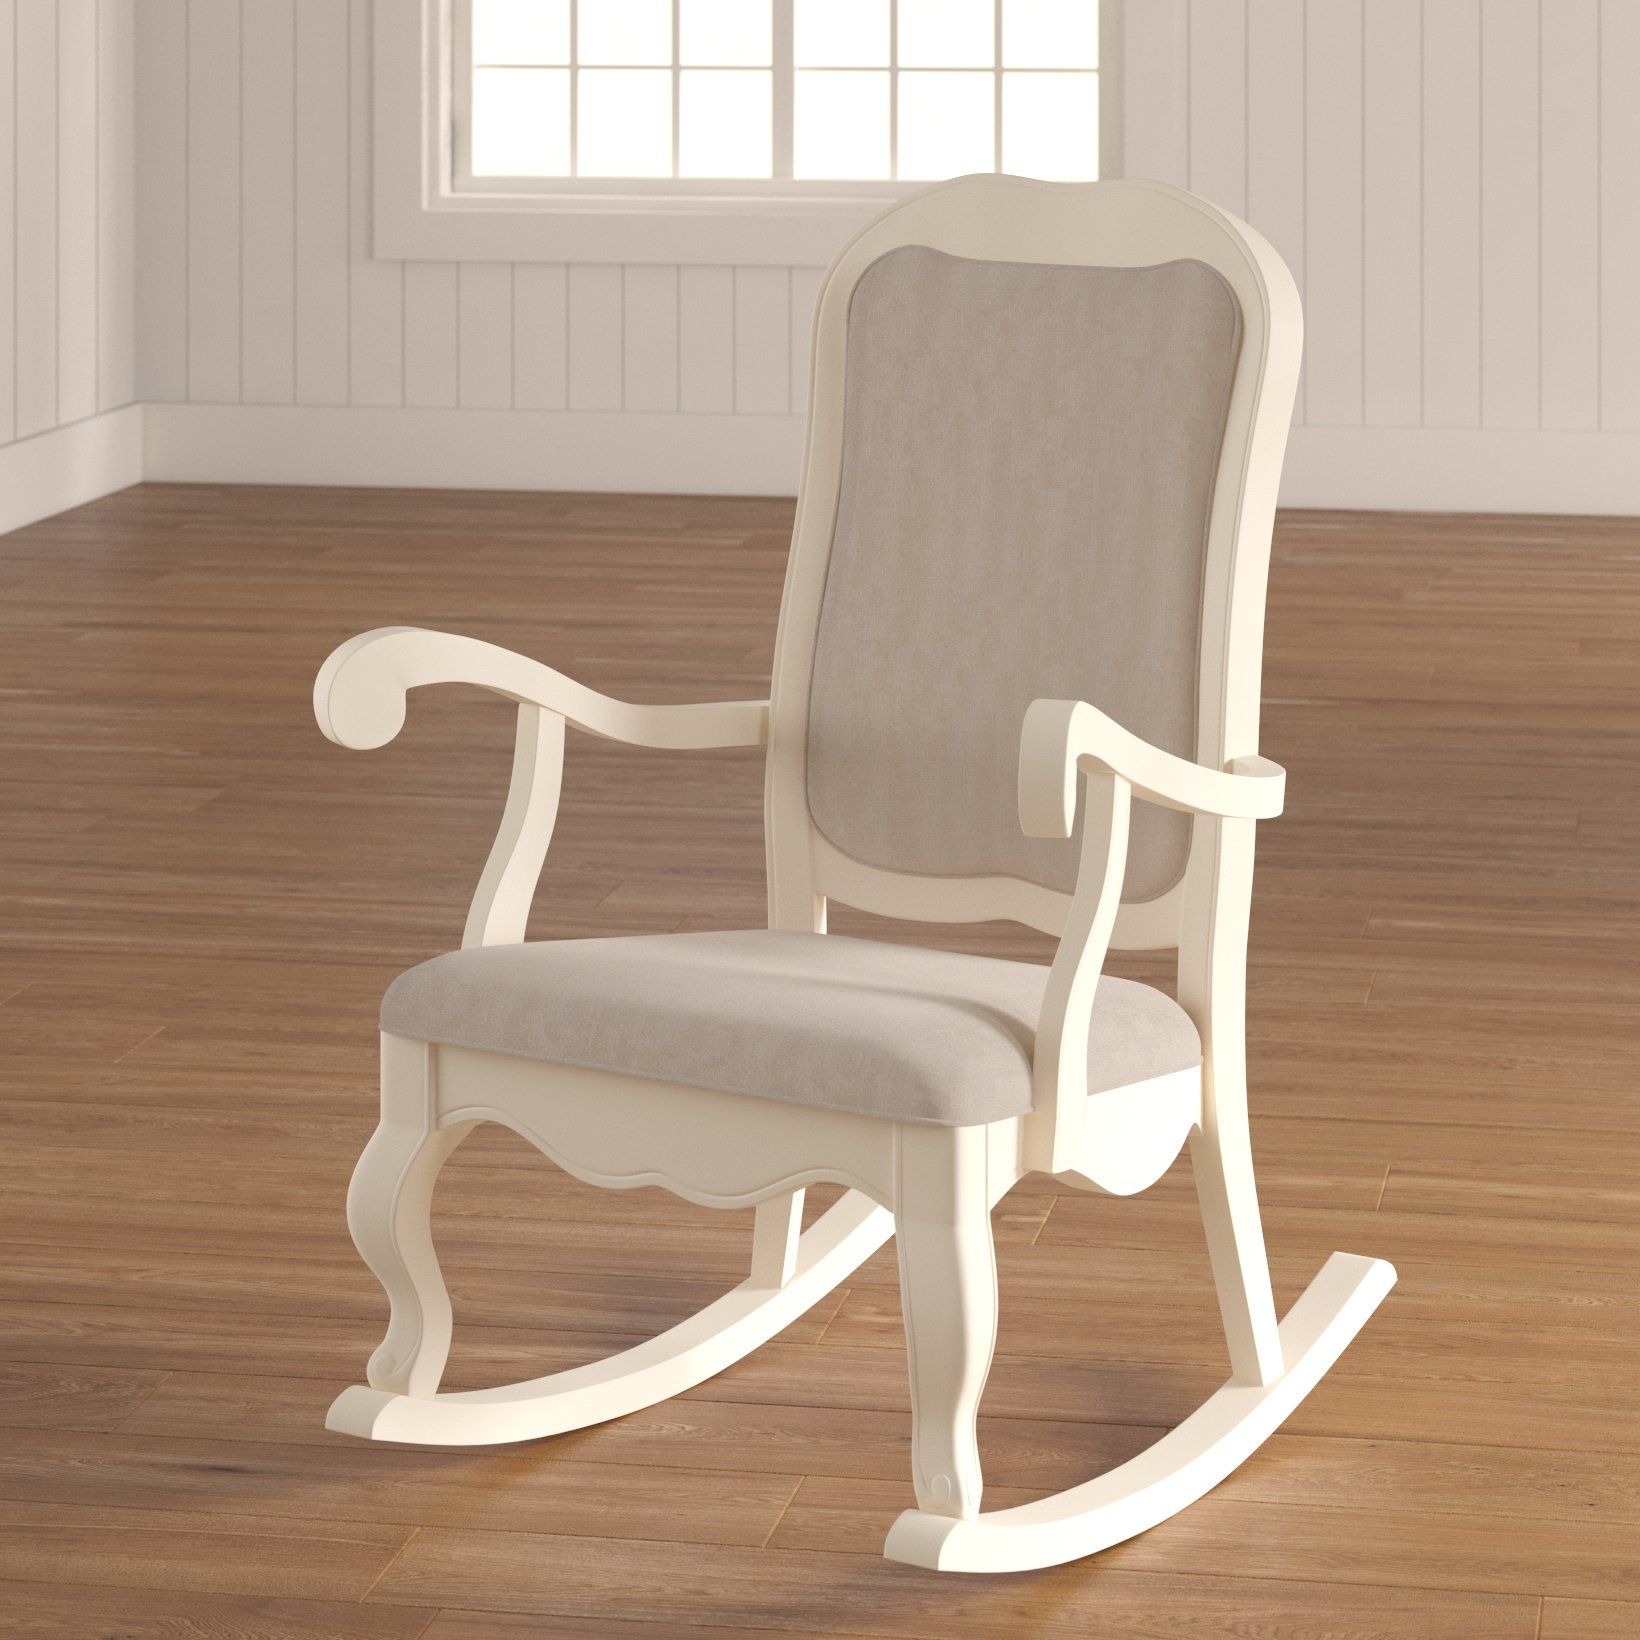 Jamestown Rocking Chair In Antique White Wooden Rocking Chairs (View 15 of 20)